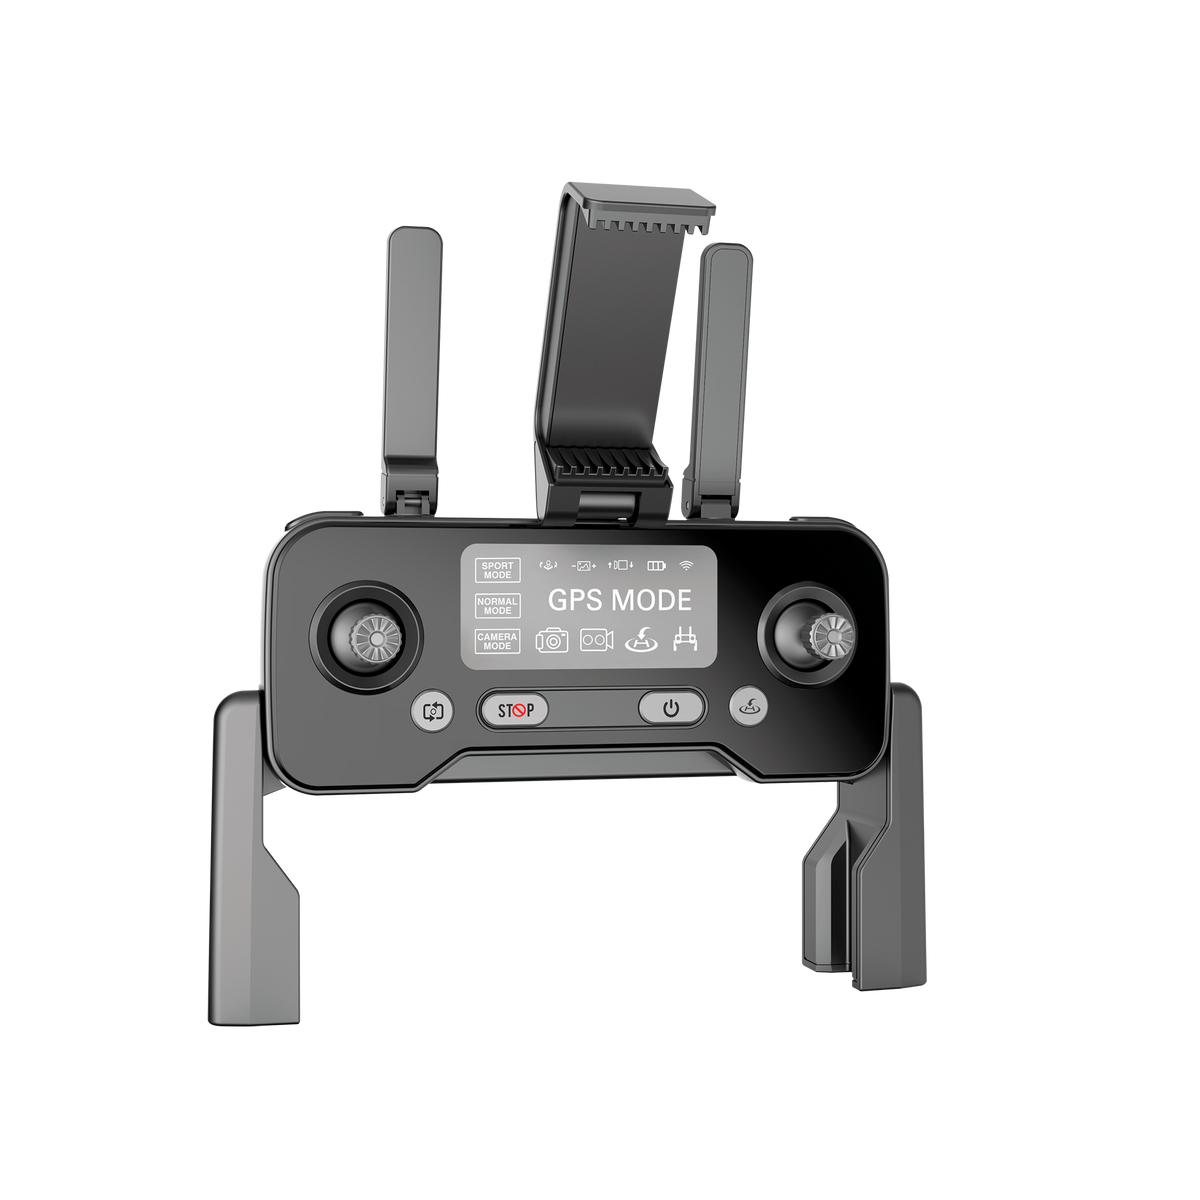 Replacement remote control for QC-120 GPS drone